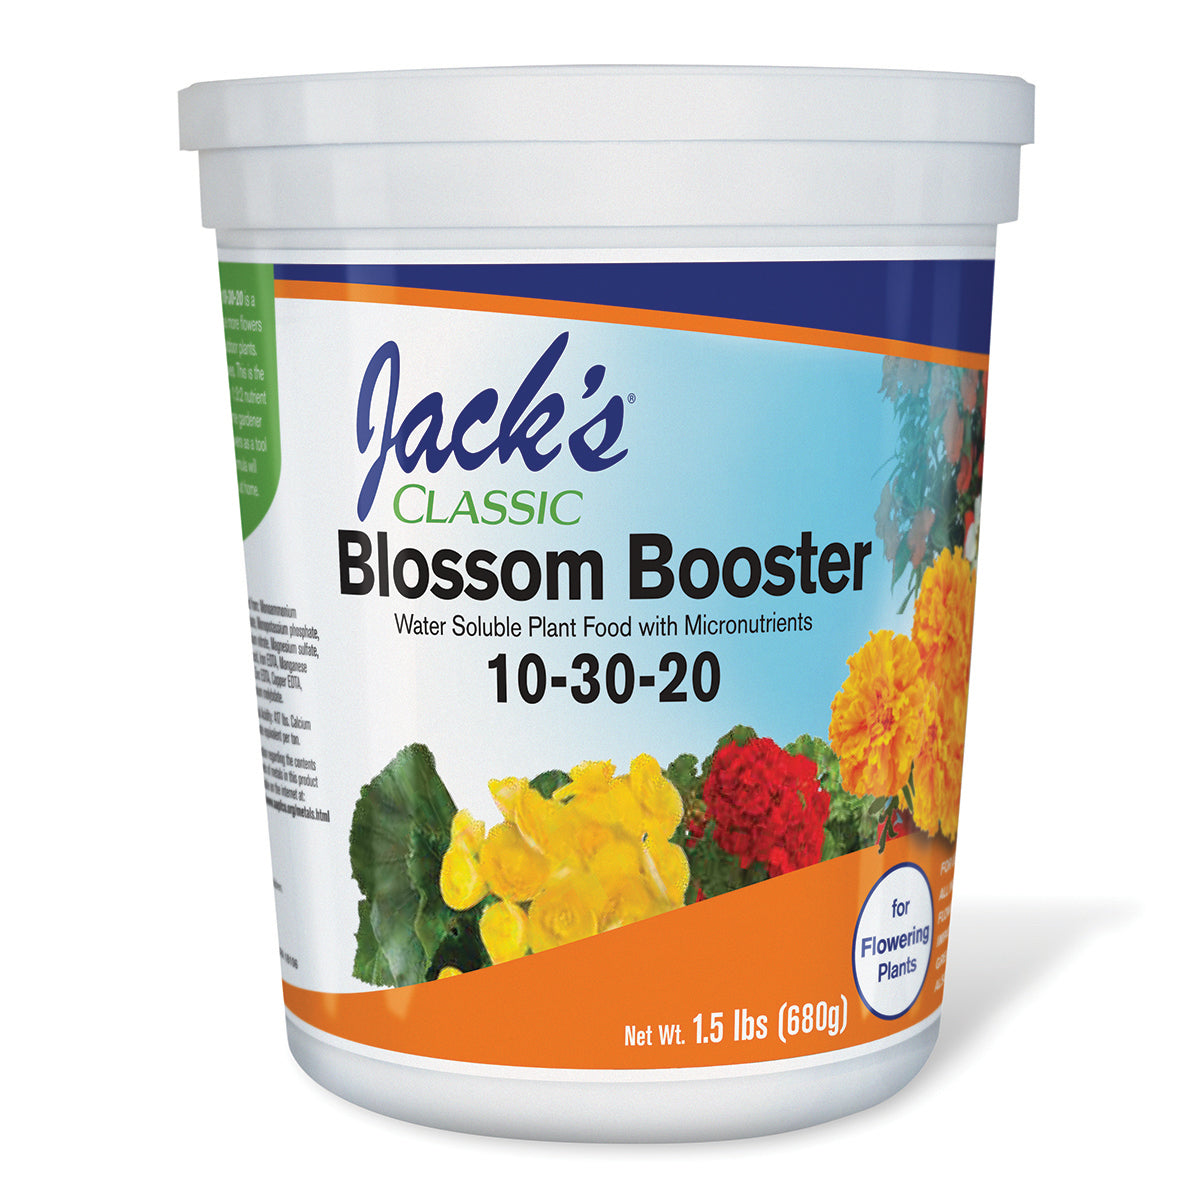 Product Secondary Image:Jack's Classic Blossom Booster 10-30-20